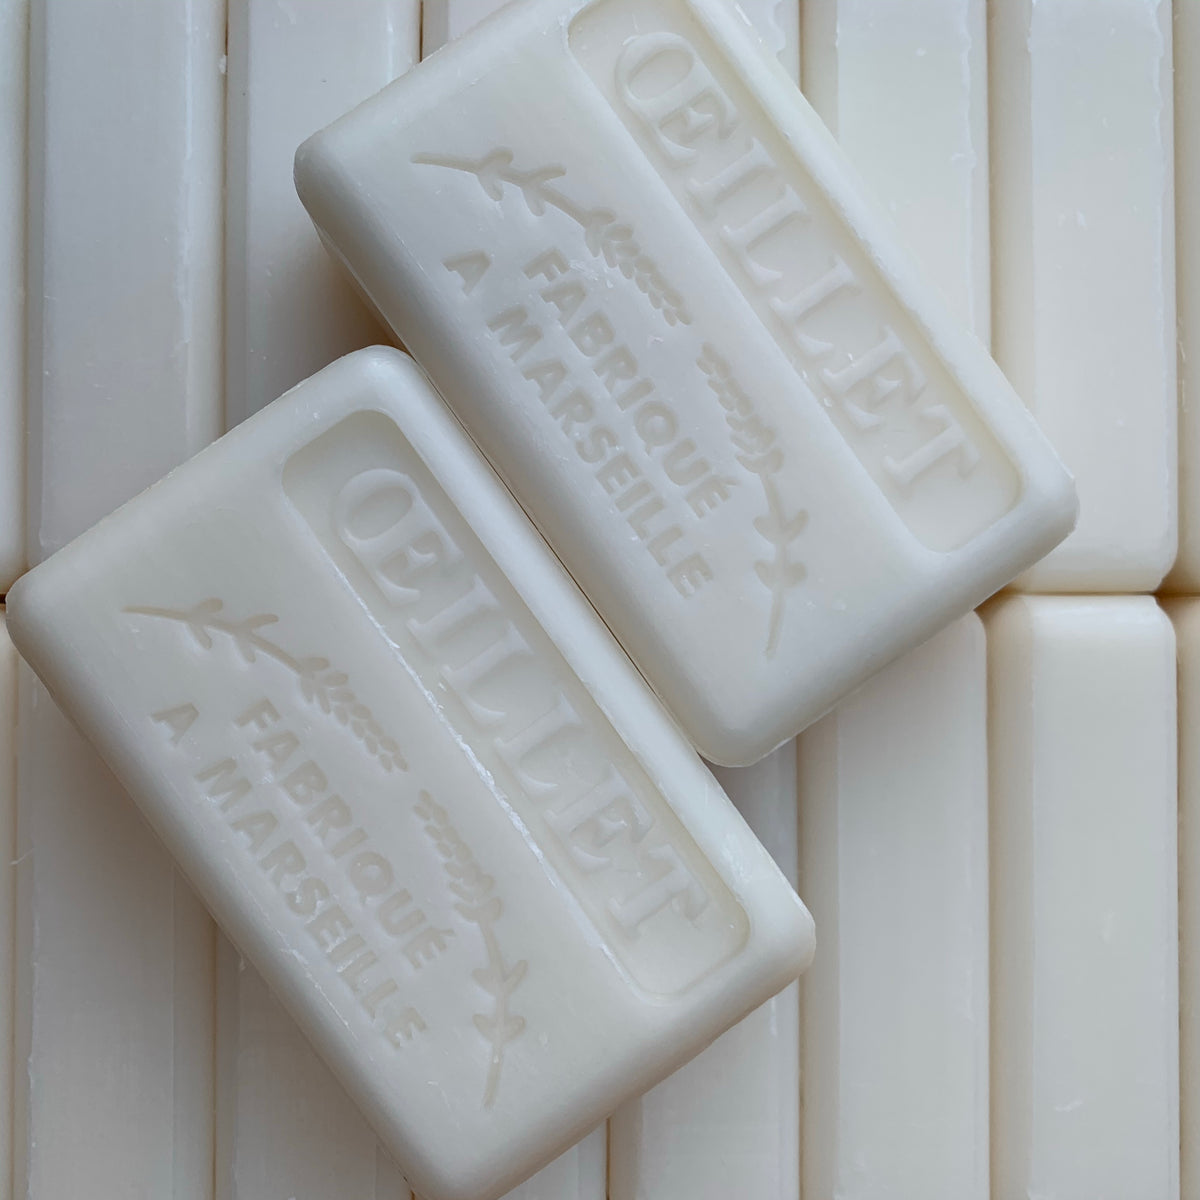 carnation classic french soap